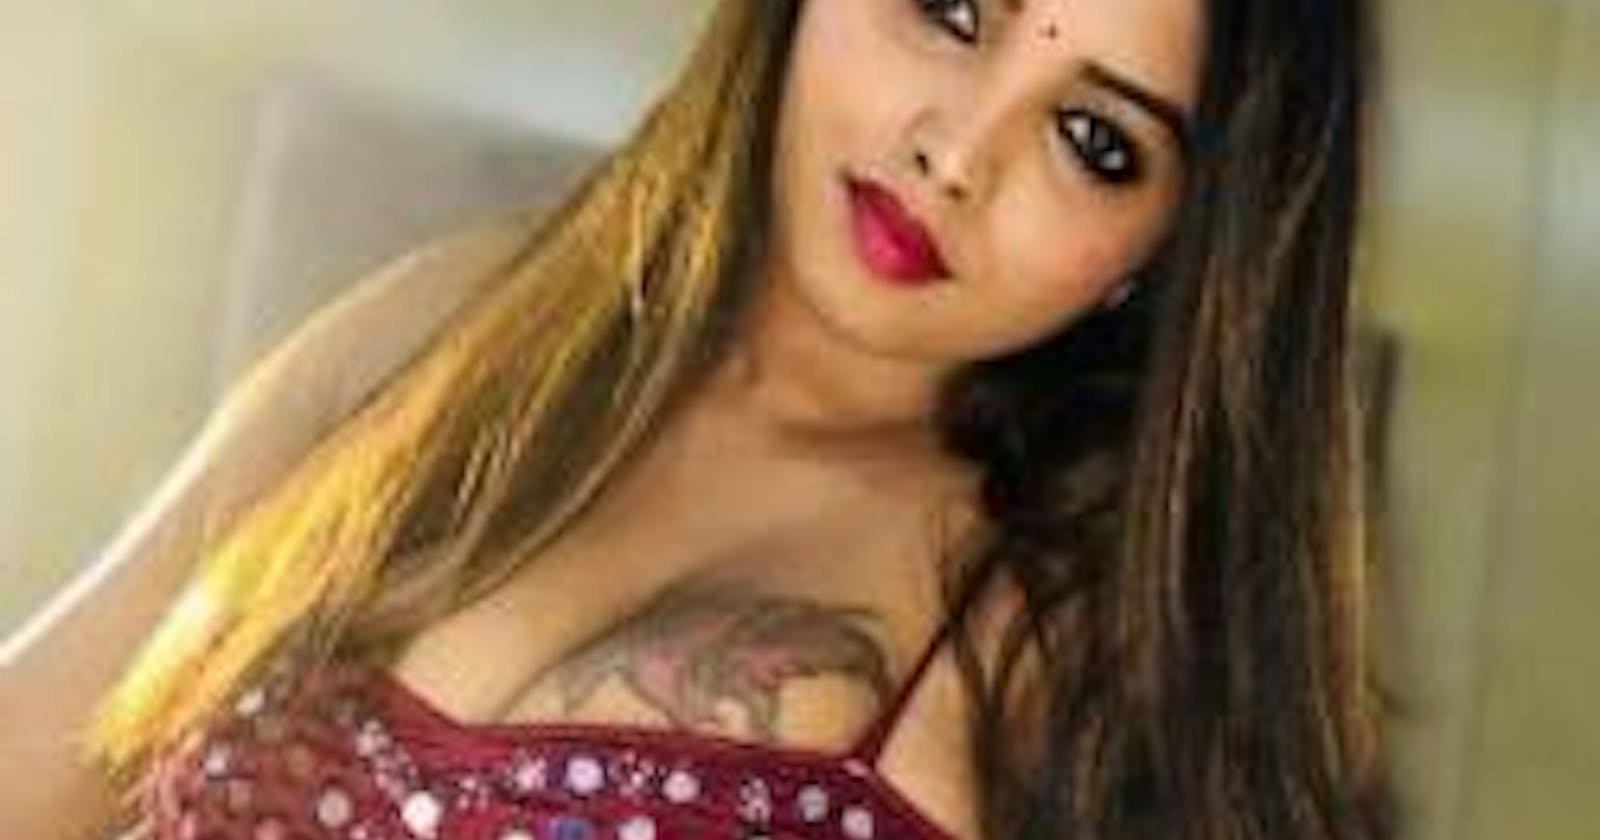 Young Call Girls in Faridabad
꧁❤ 8800343505❤꧂ Escorts Service in Delhi Ncr